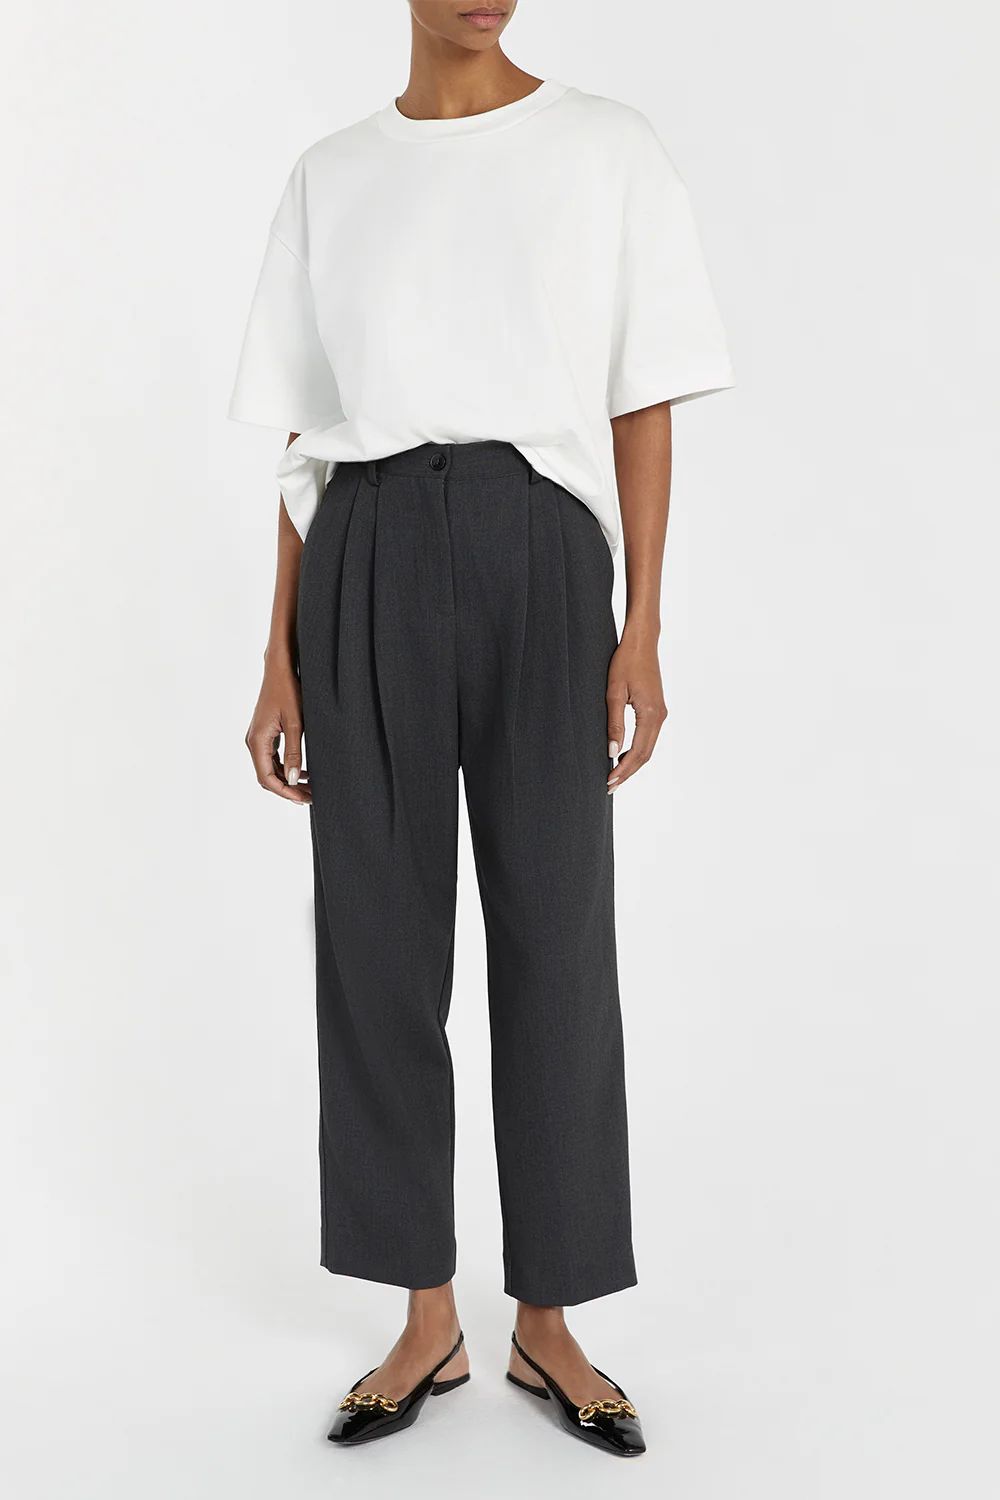 CAREY CHARCOAL TAPERED PANT | DISSH